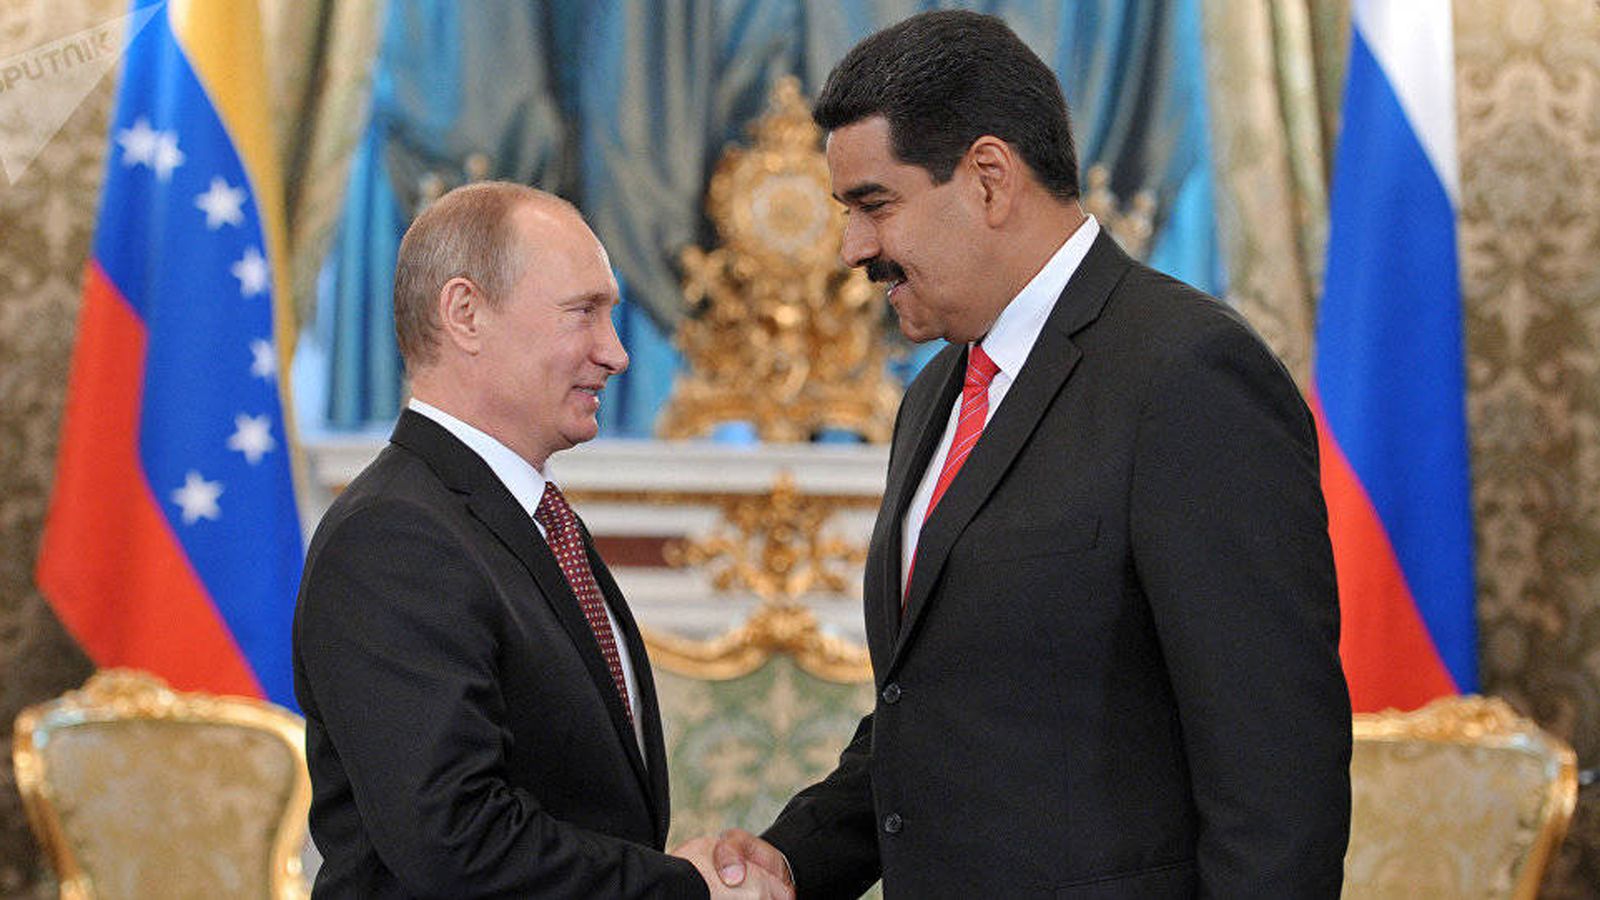 Venezuelan President Nicolas Maduro (right) being greeted by Russian President Vladimir Putin (left) in Moscow. File photo.